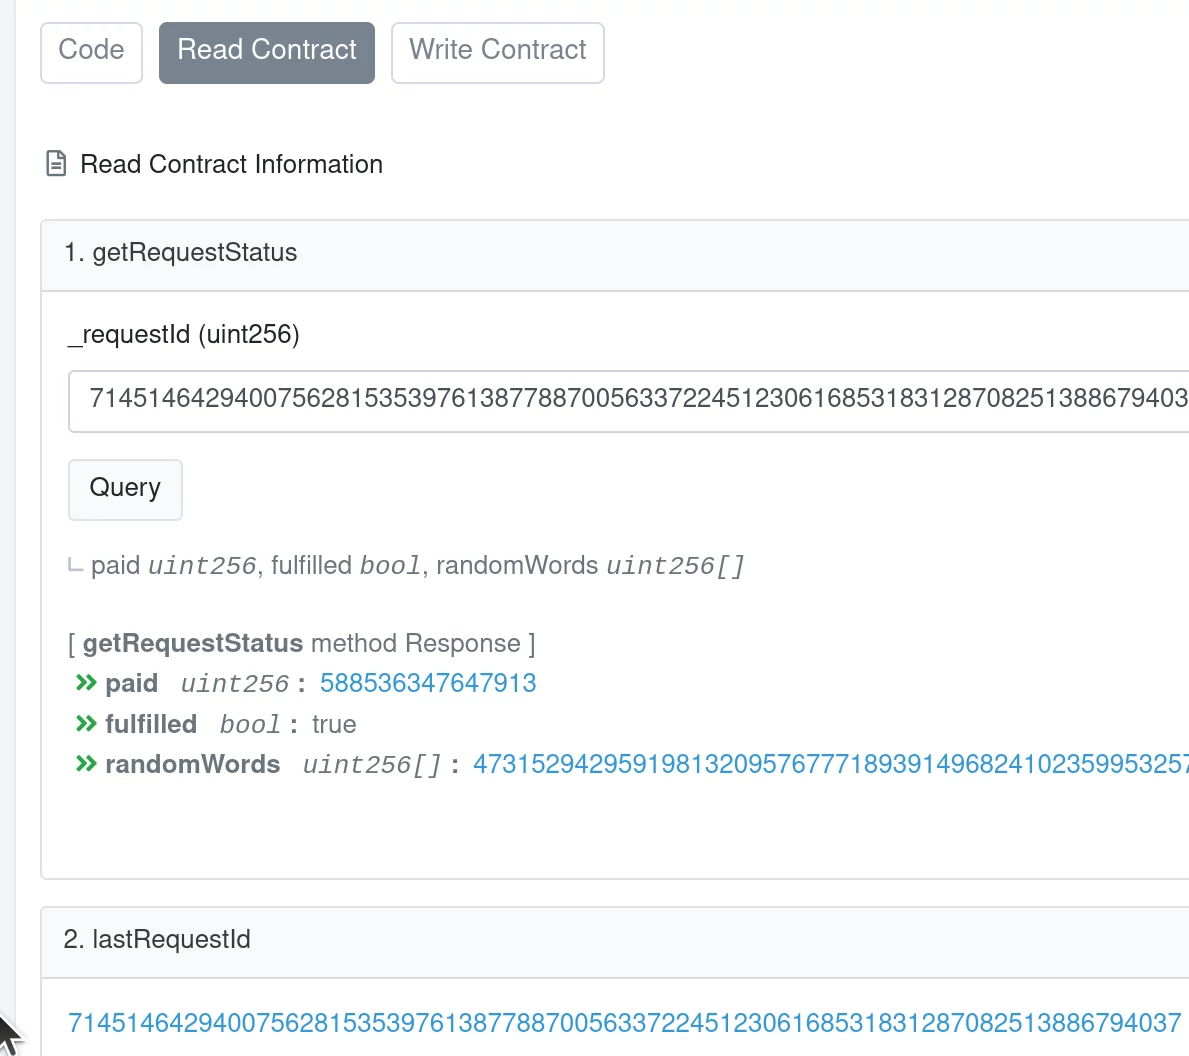 View the request status with your lastRequestId value